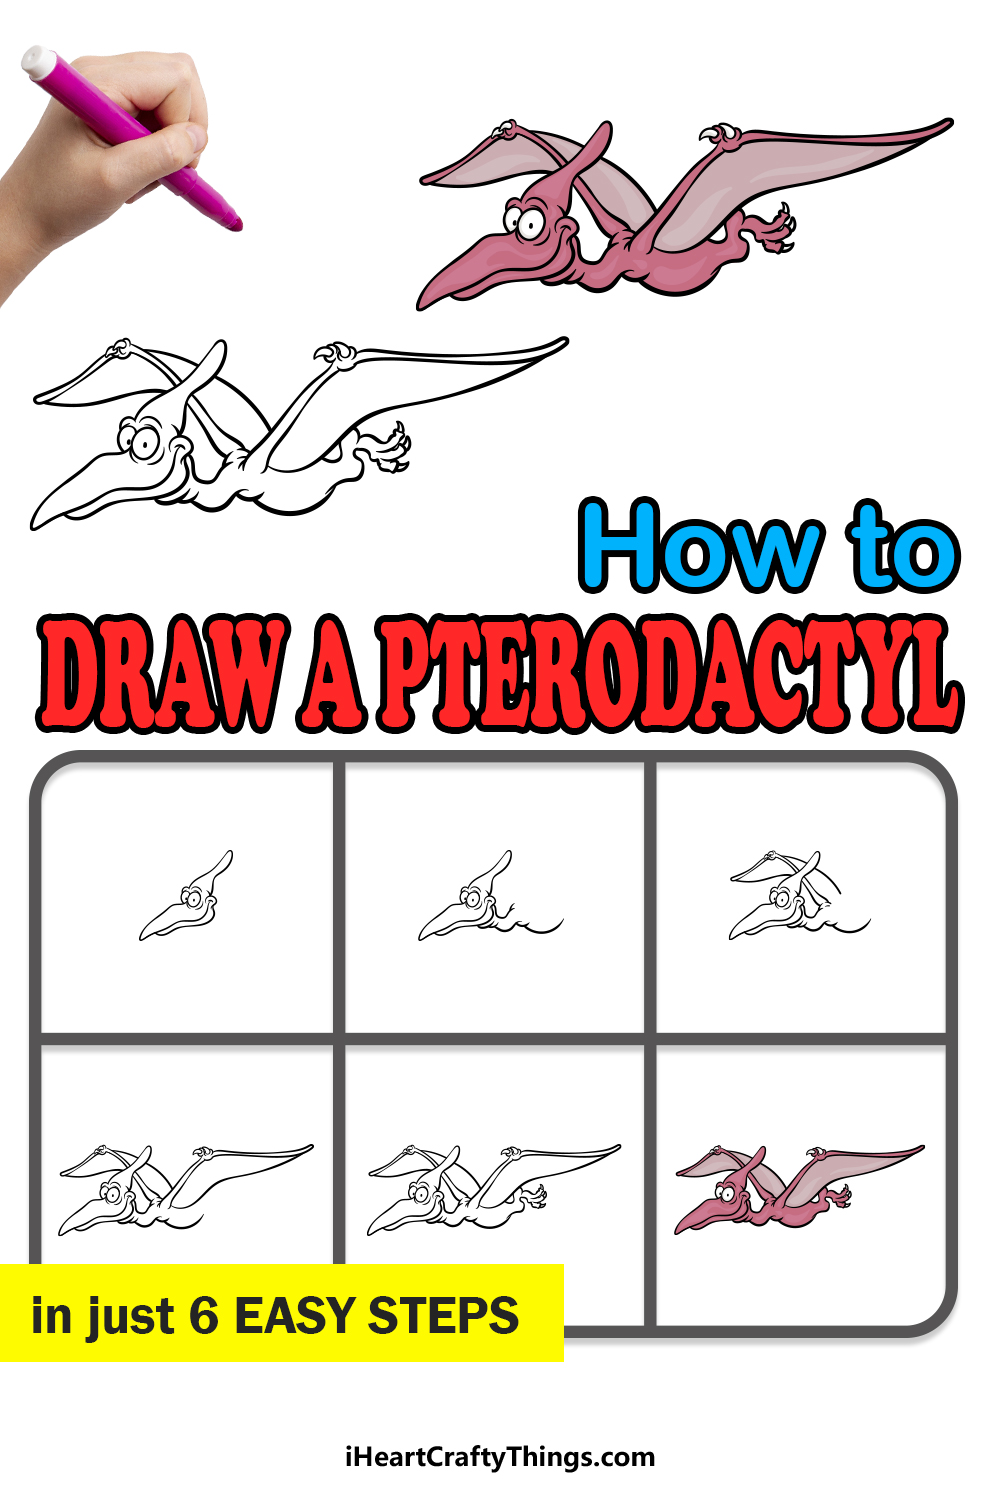 how to draw a Pterodactyl in 6 easy steps